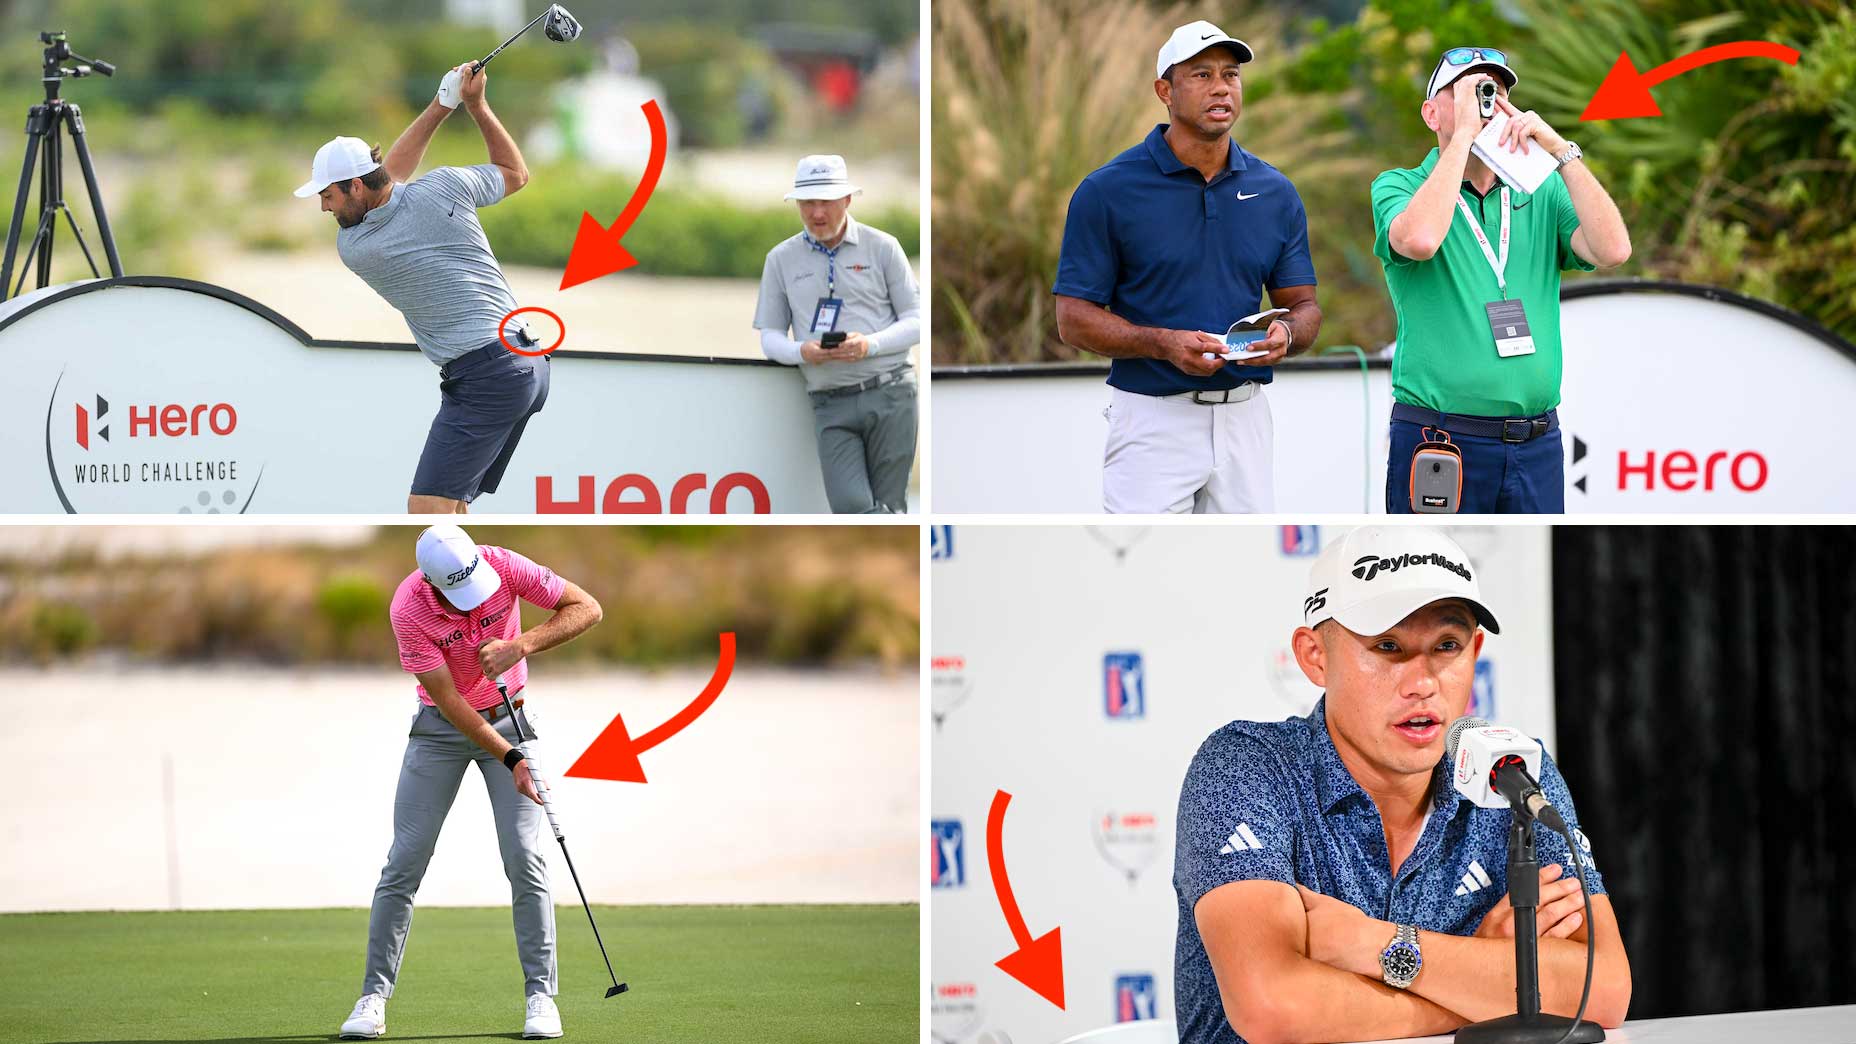 5 intriguing changes (caddies, coaches, clubs!) spotted at Tiger Woods’ event